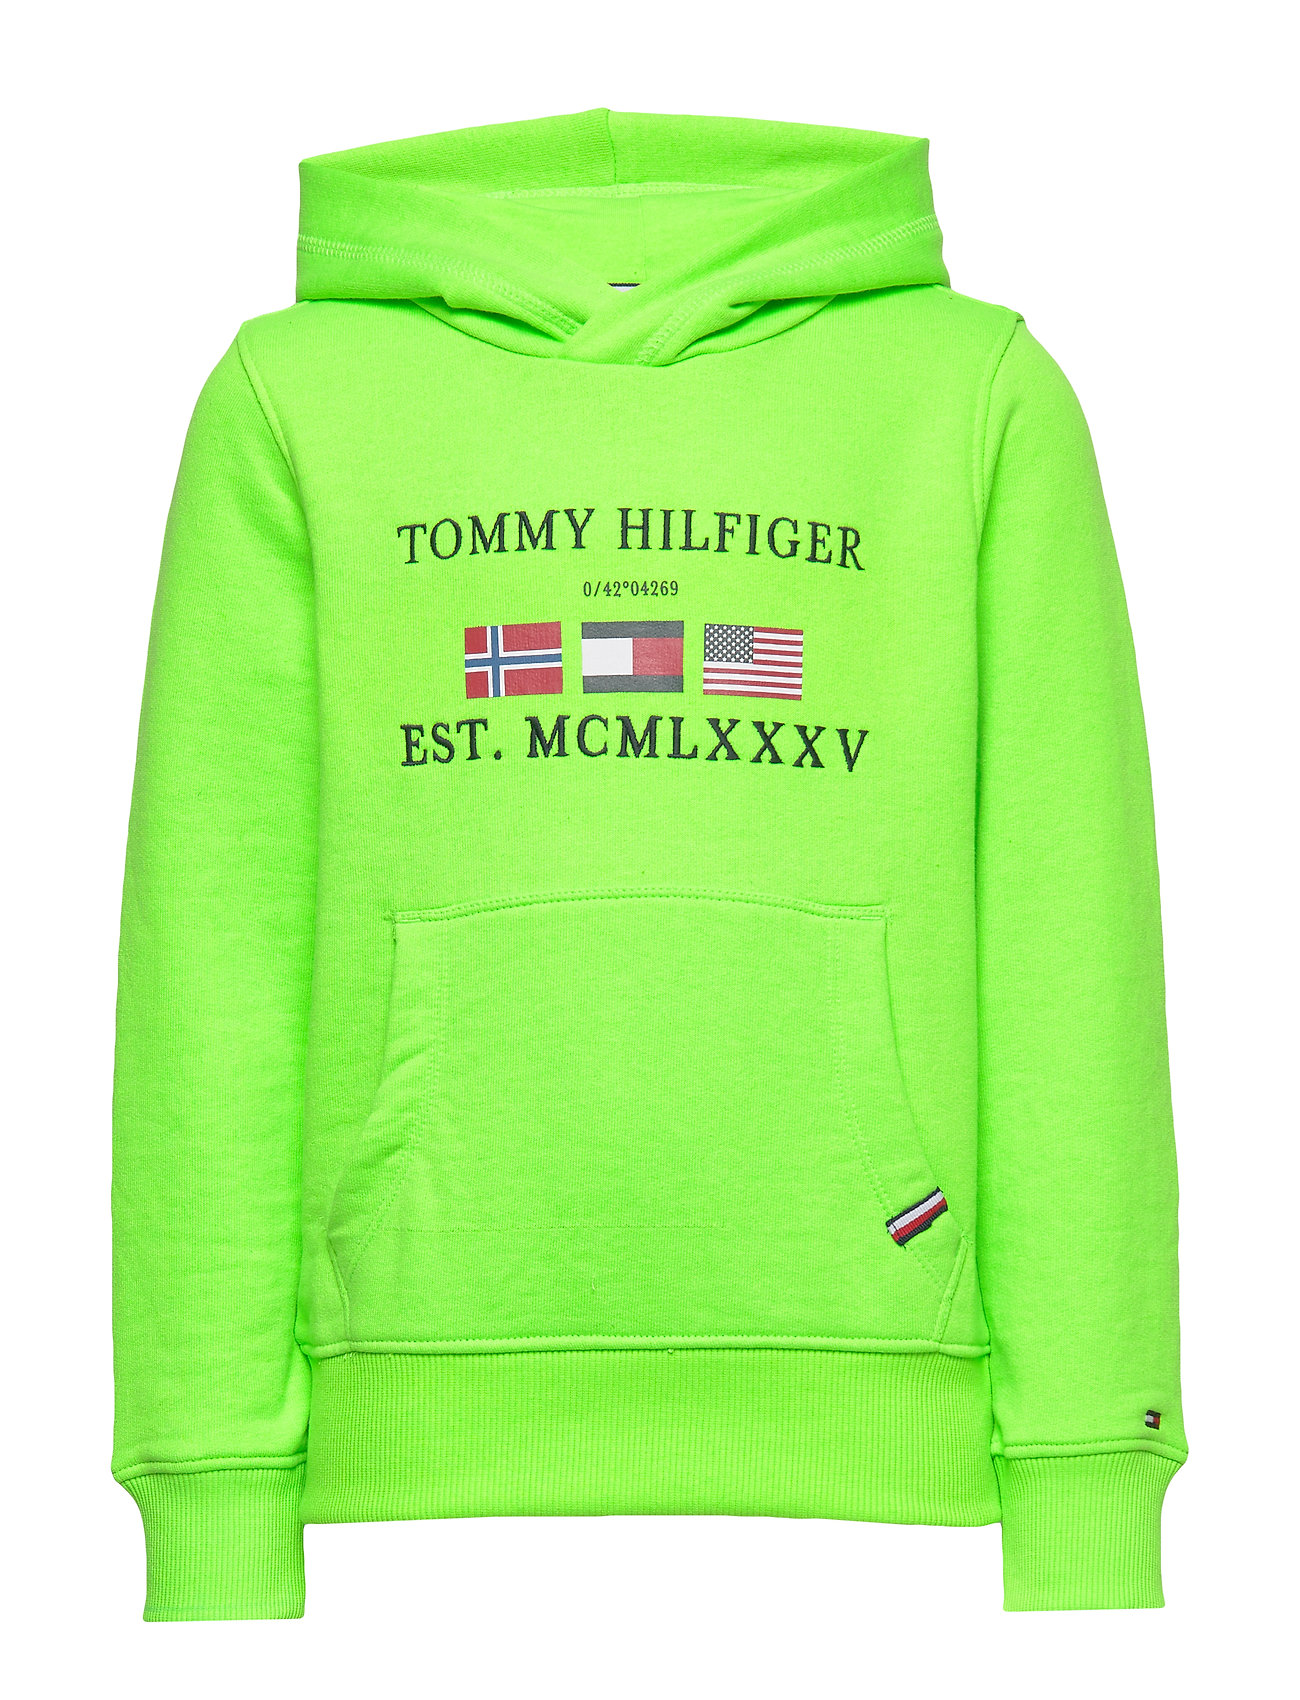 tommy hilfiger green Online shopping 